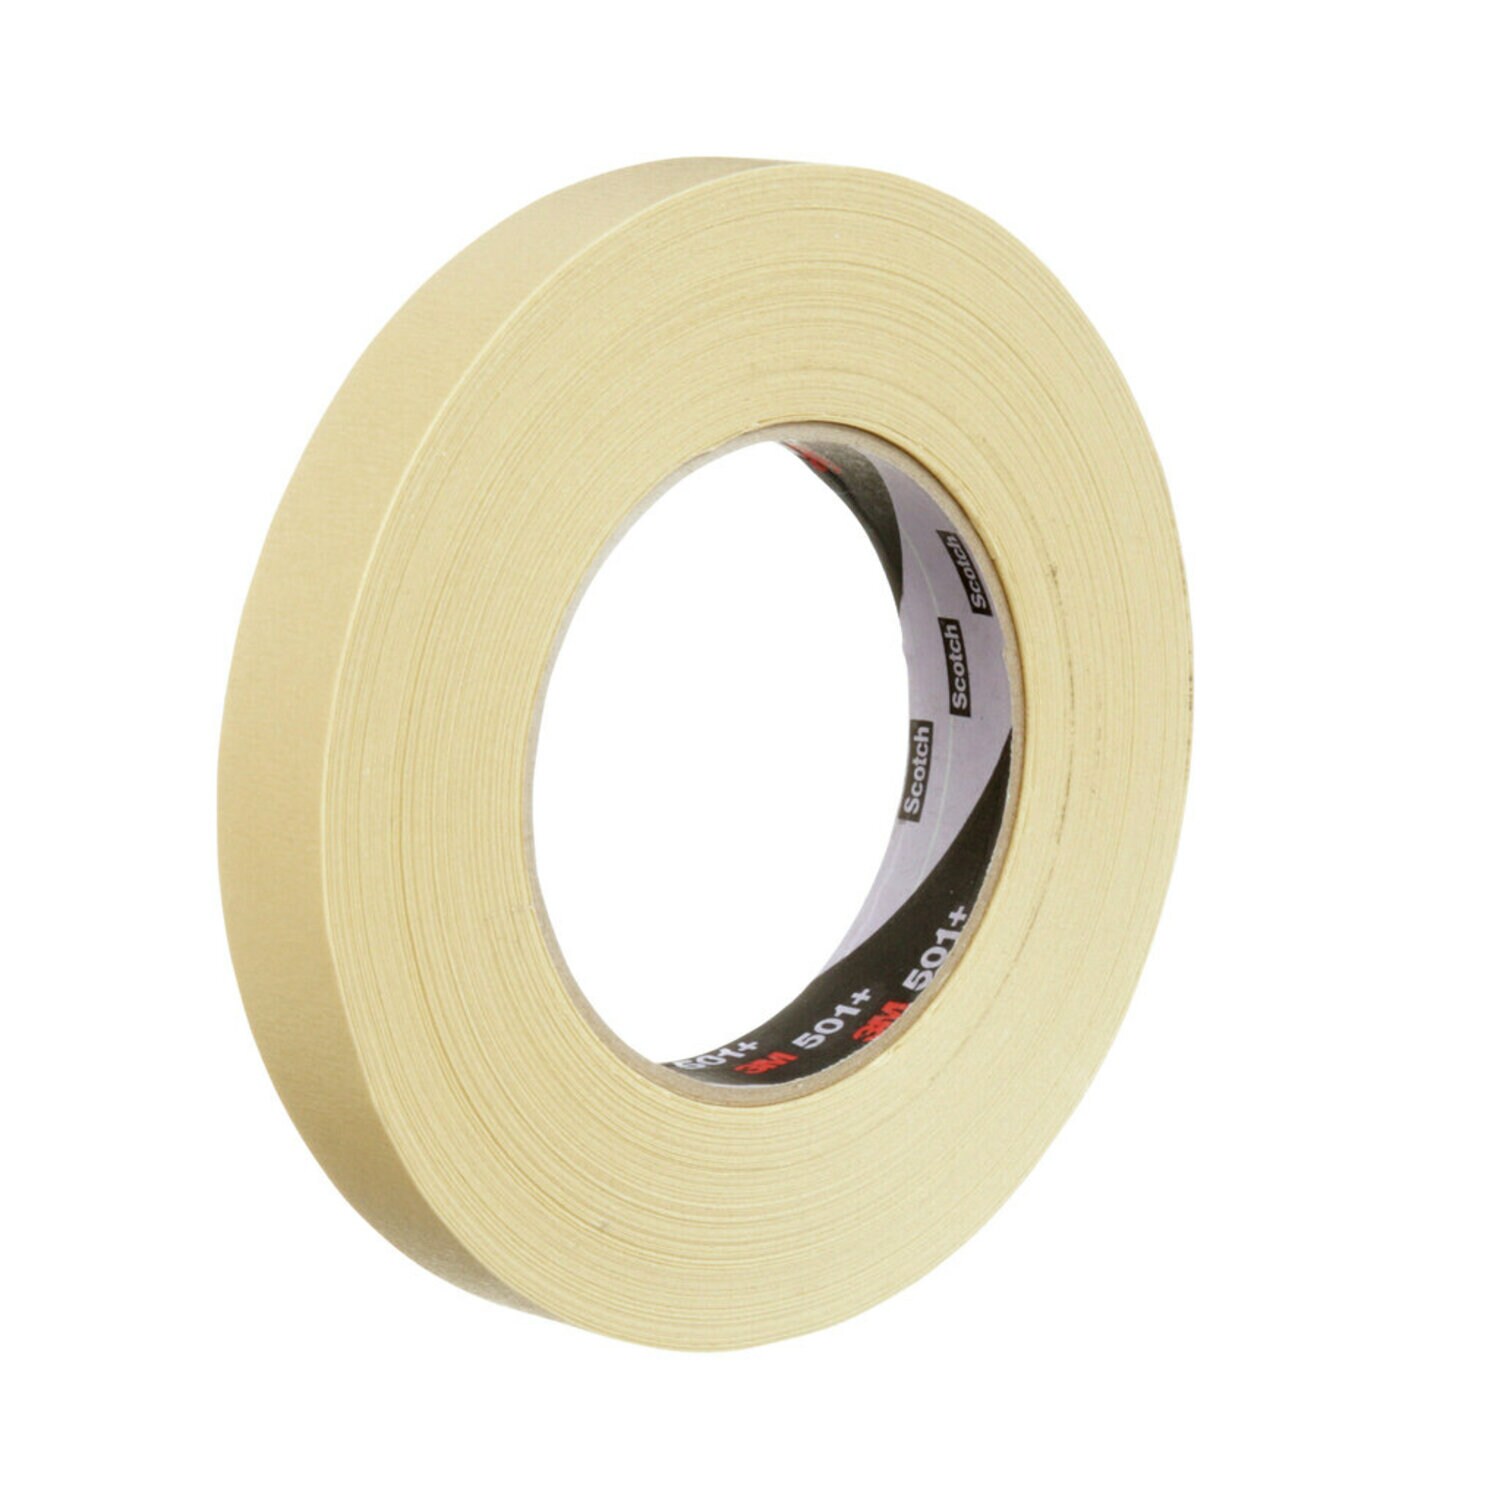 7000138485 - 3M Specialty High Temperature Masking Tape 501+, Tan, 18 mm x 55 m, 7.3
mil, 48 Rolls/Case